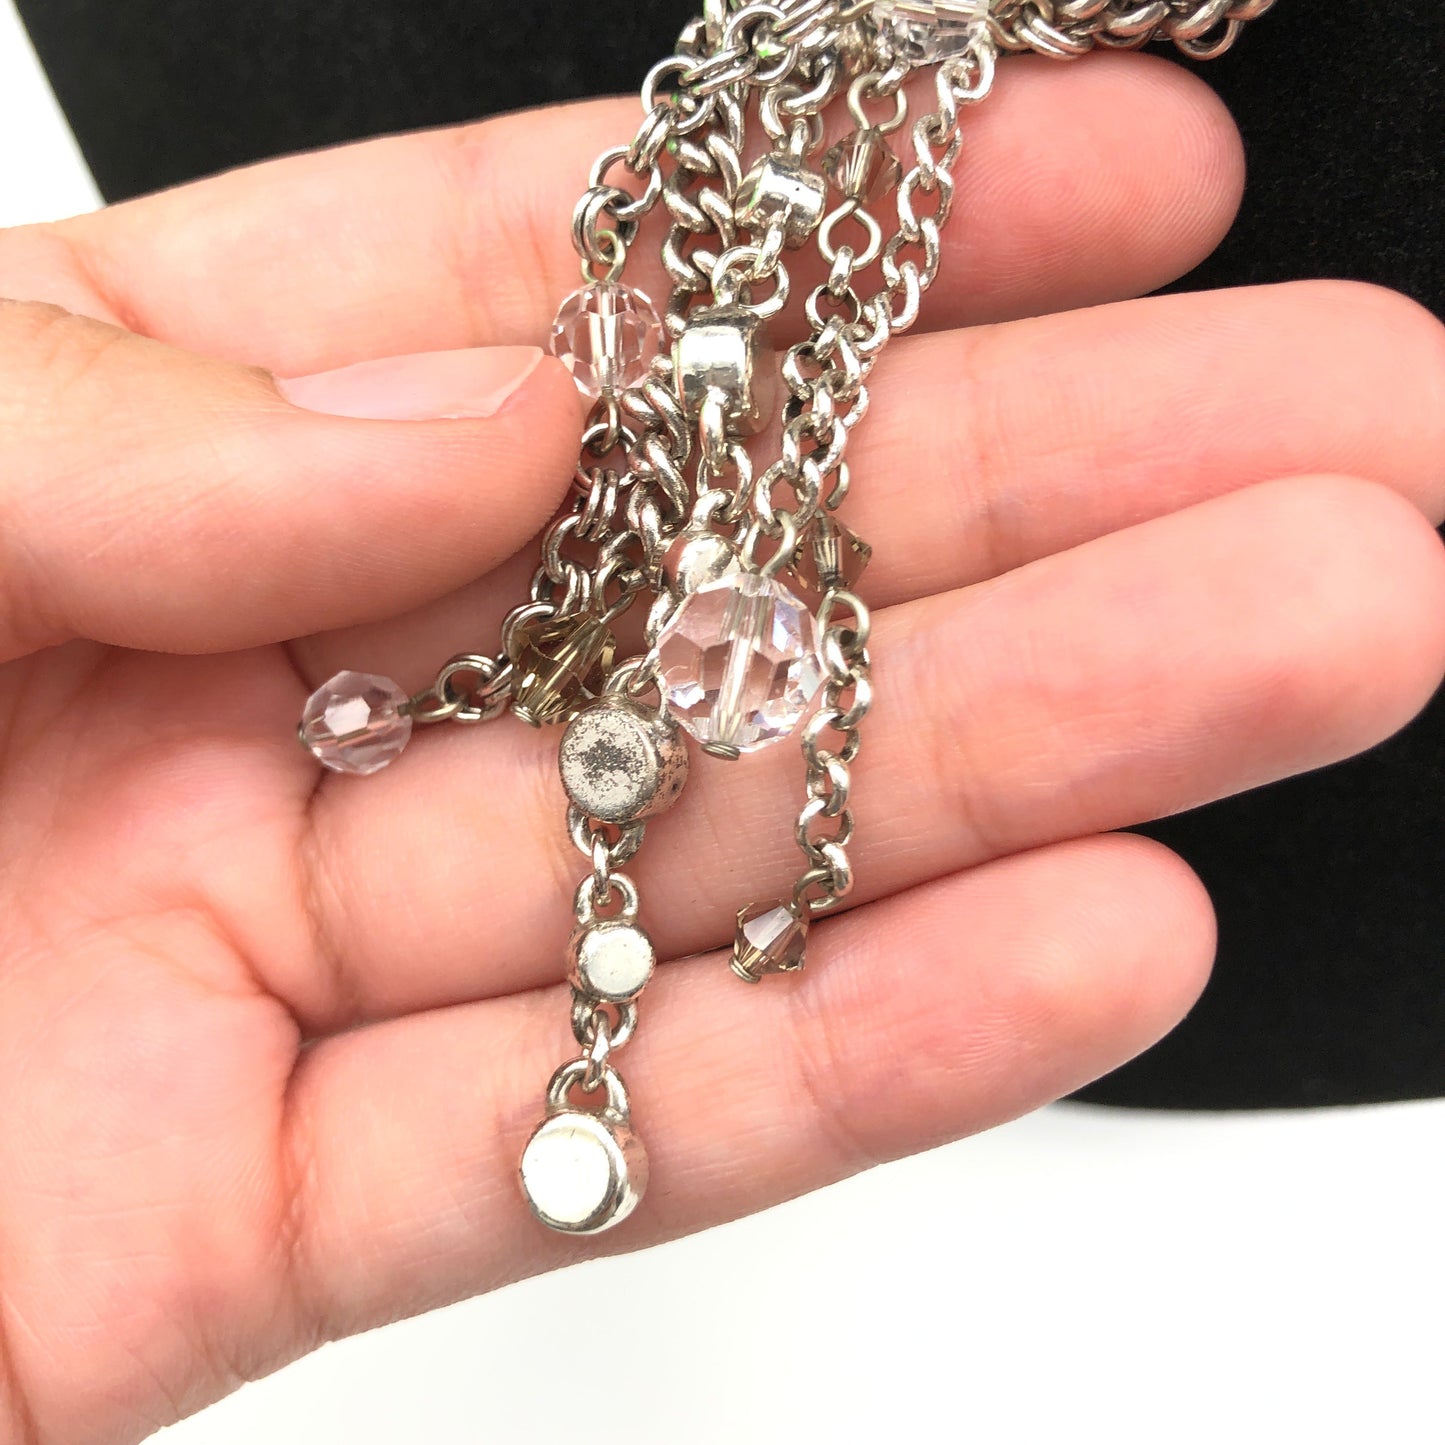 Necklace Chain By Brighton O